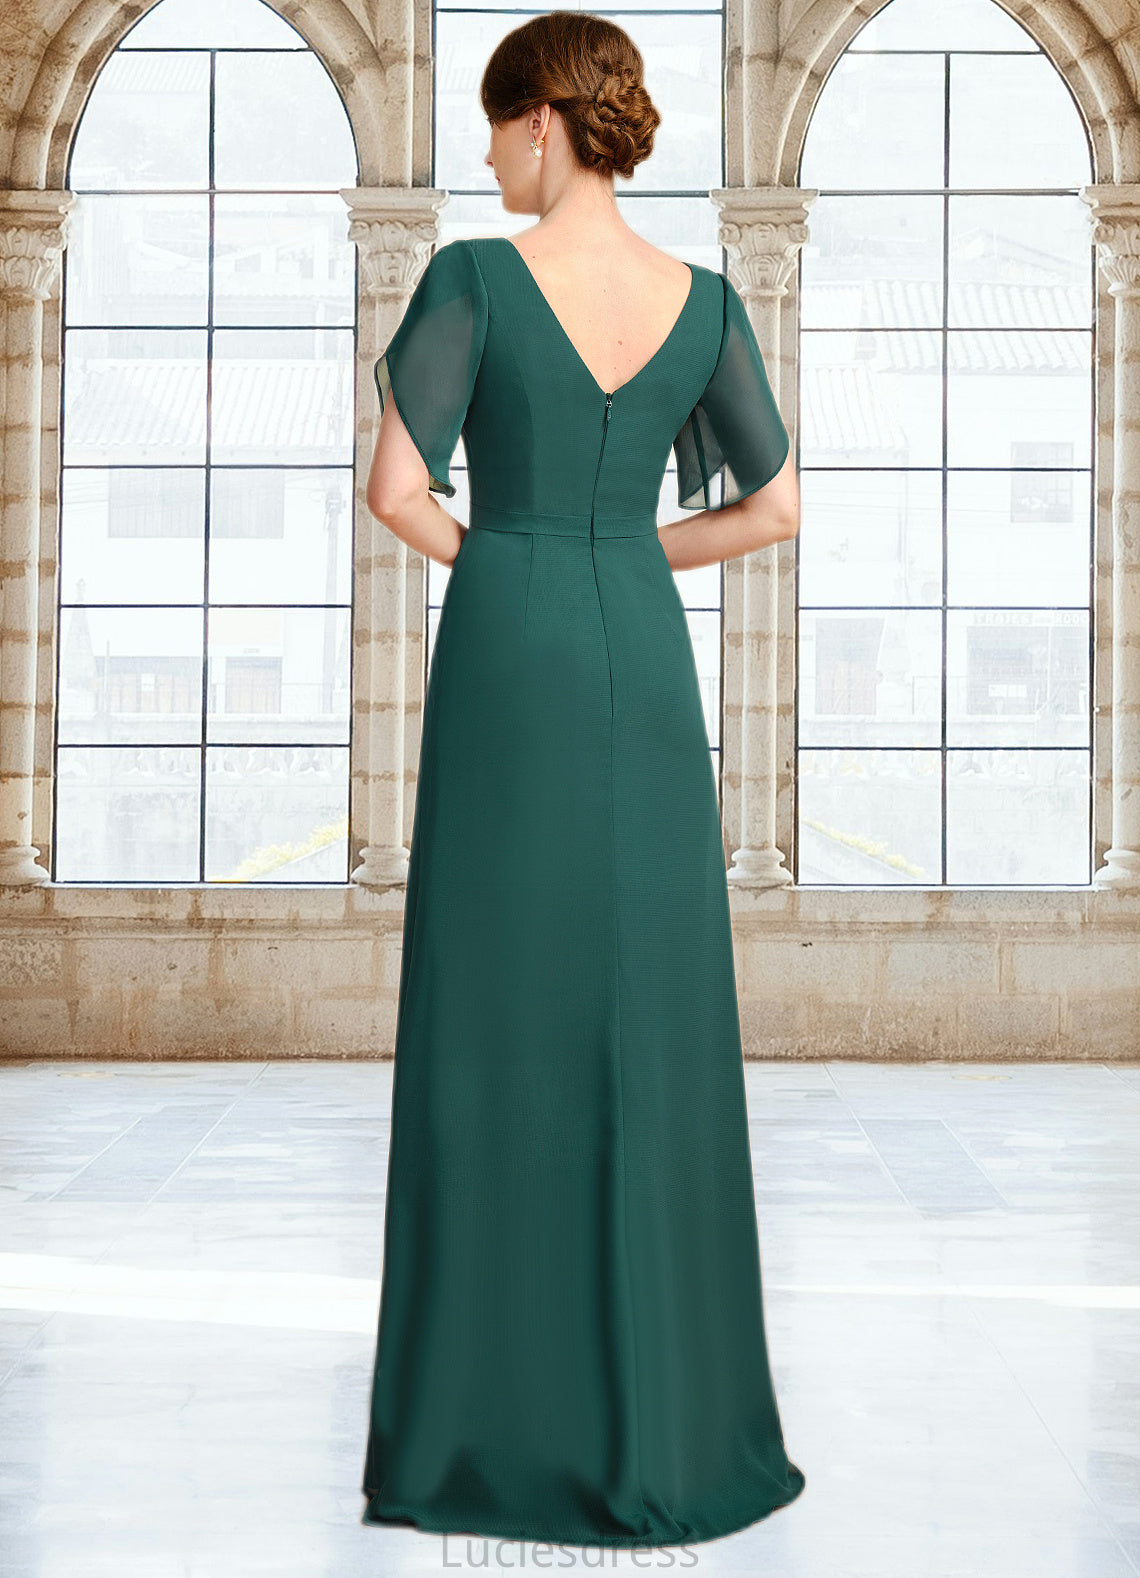 Vicky Sheath/Column V-Neck Floor-Length Chiffon Mother of the Bride Dress With Beading Pleated HFP0021949